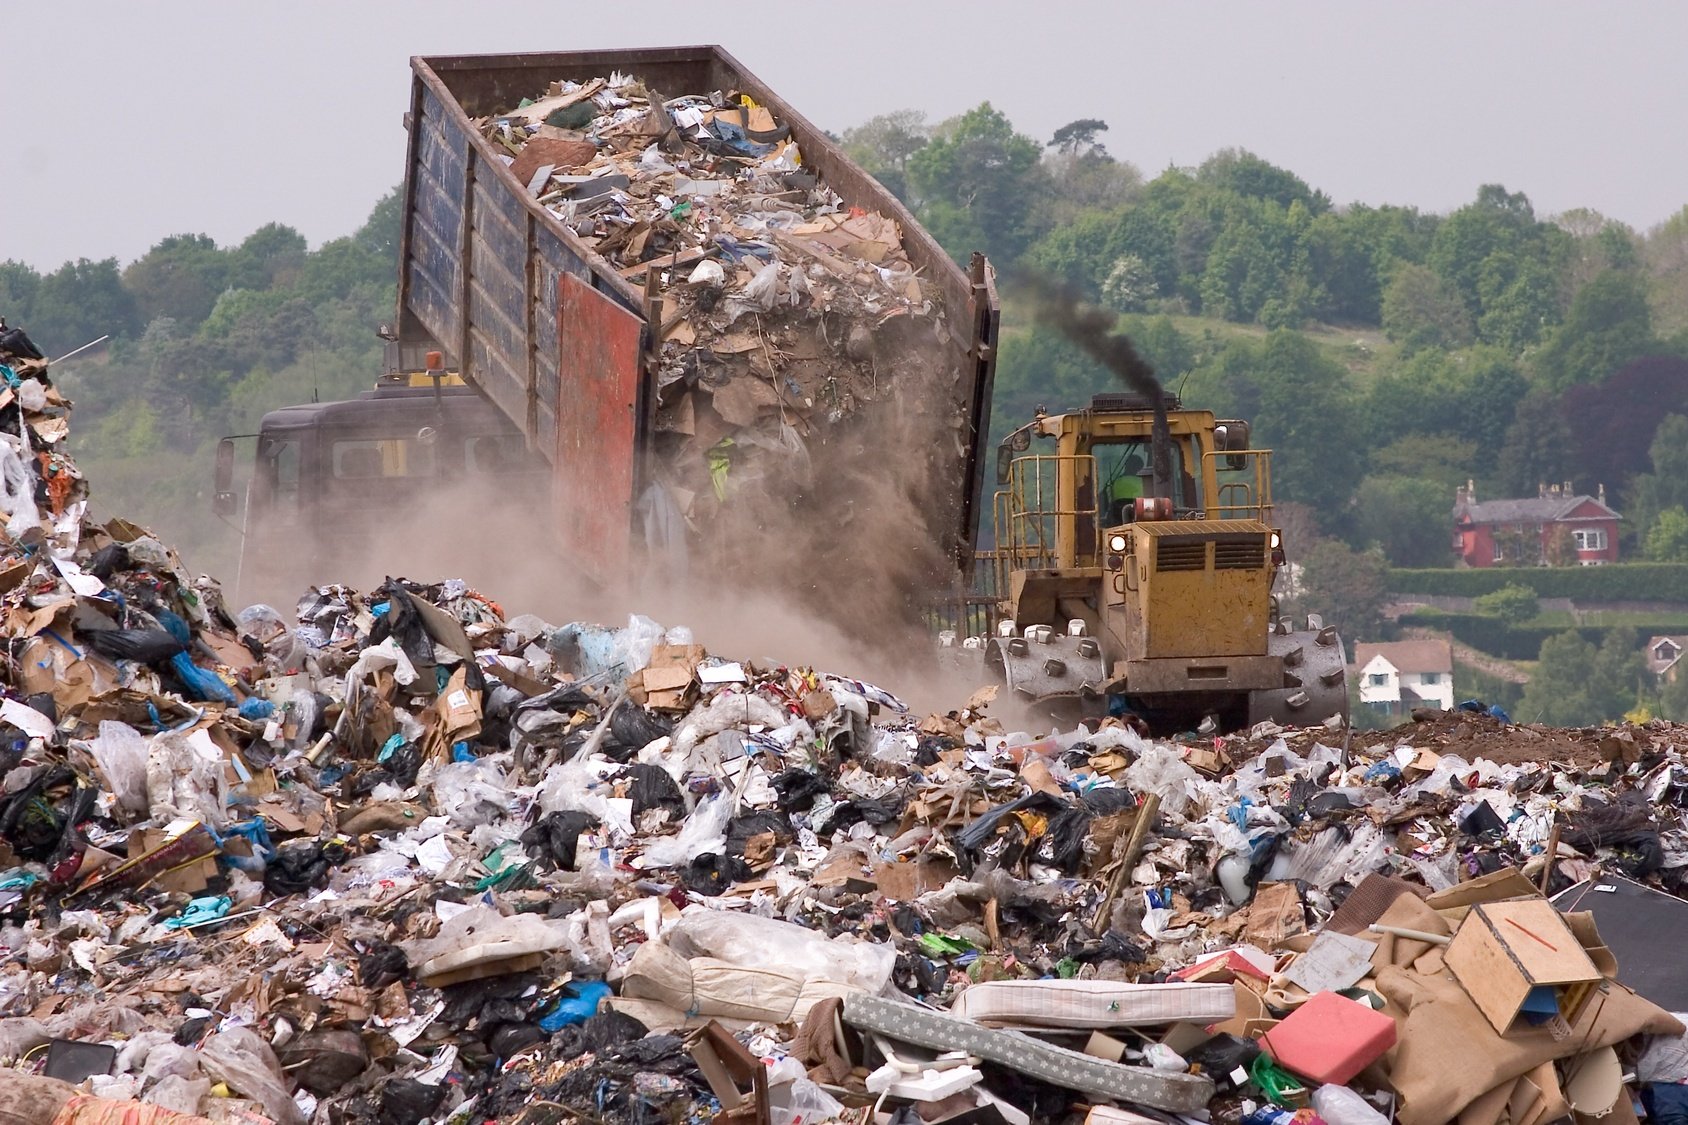 Landfill Problems Solutions 1